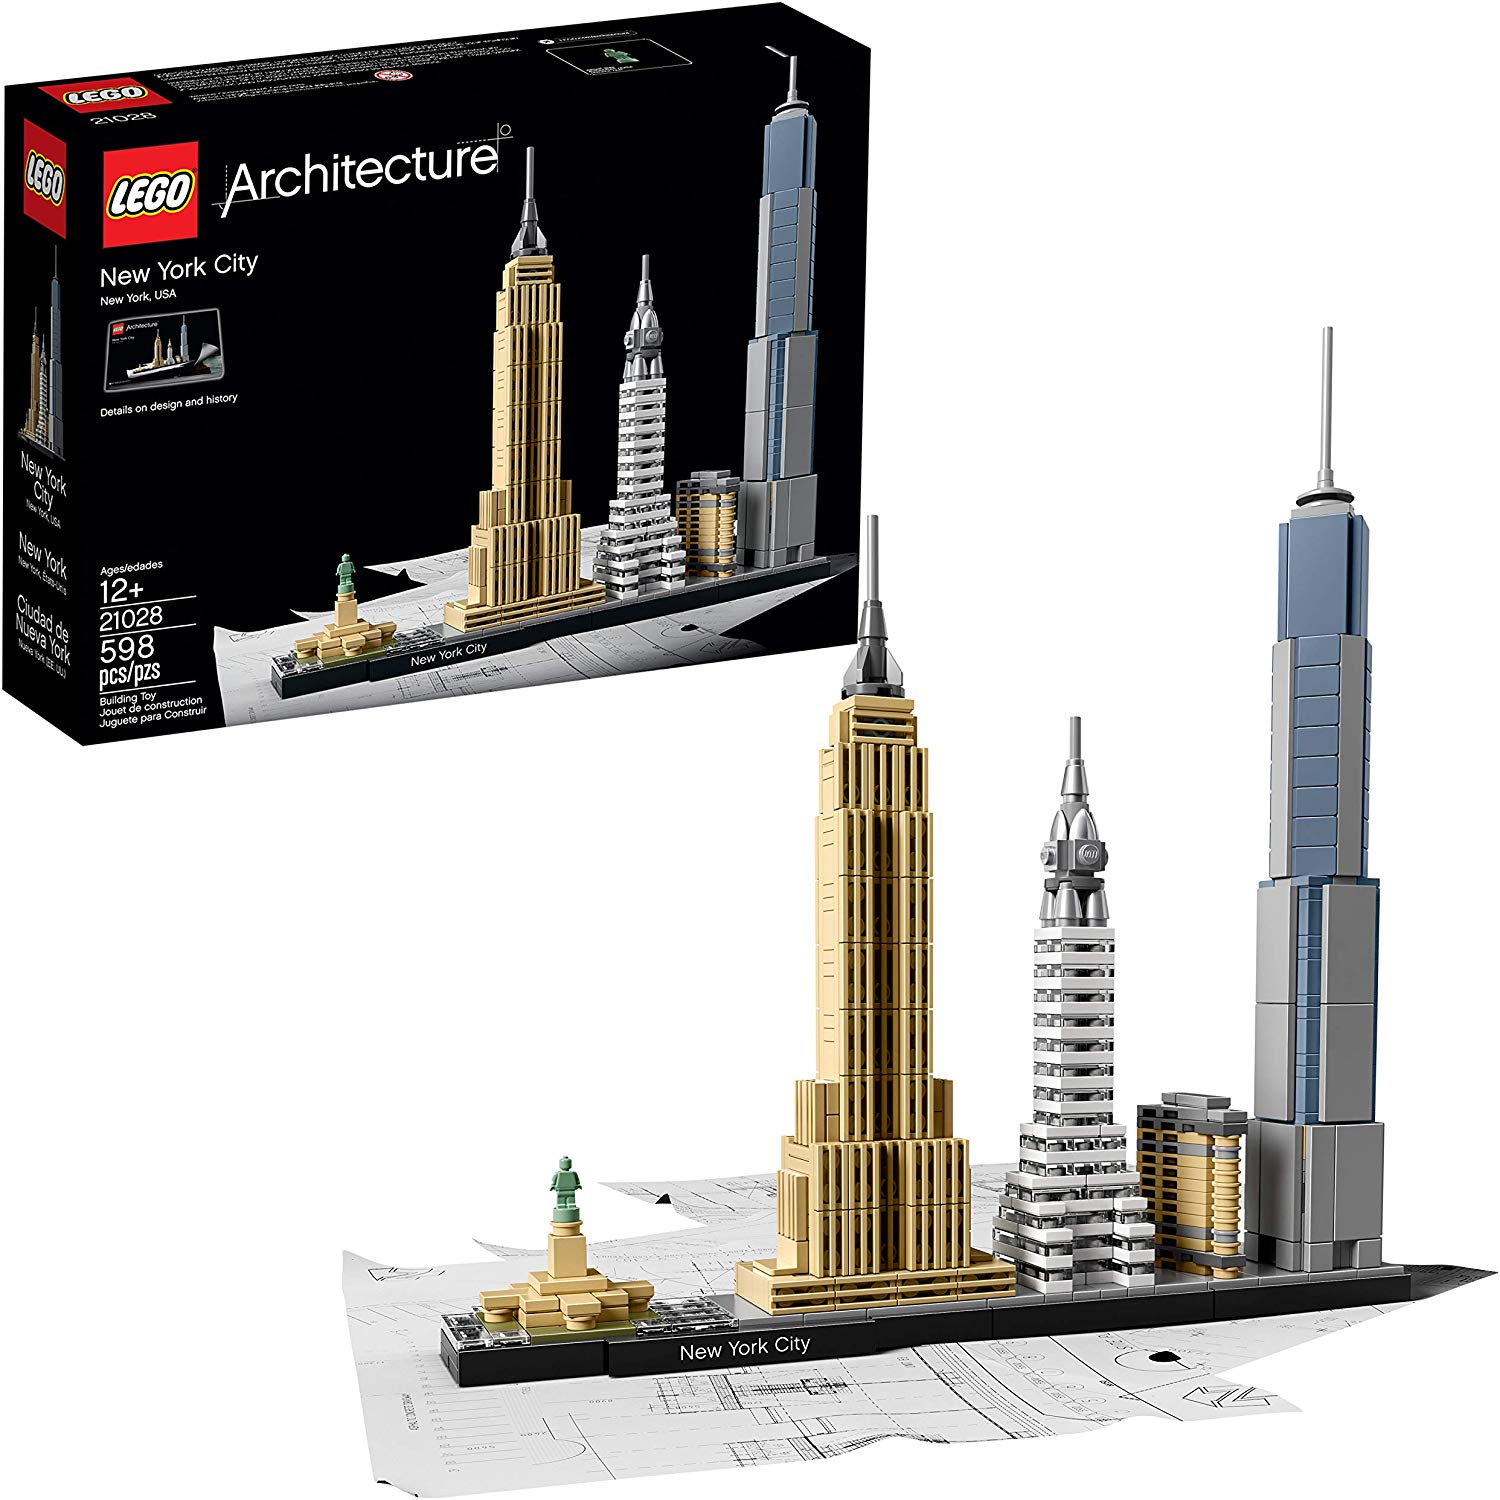 Best LEGO Architecture Sets 2020 - Buyers Guide & Reviews